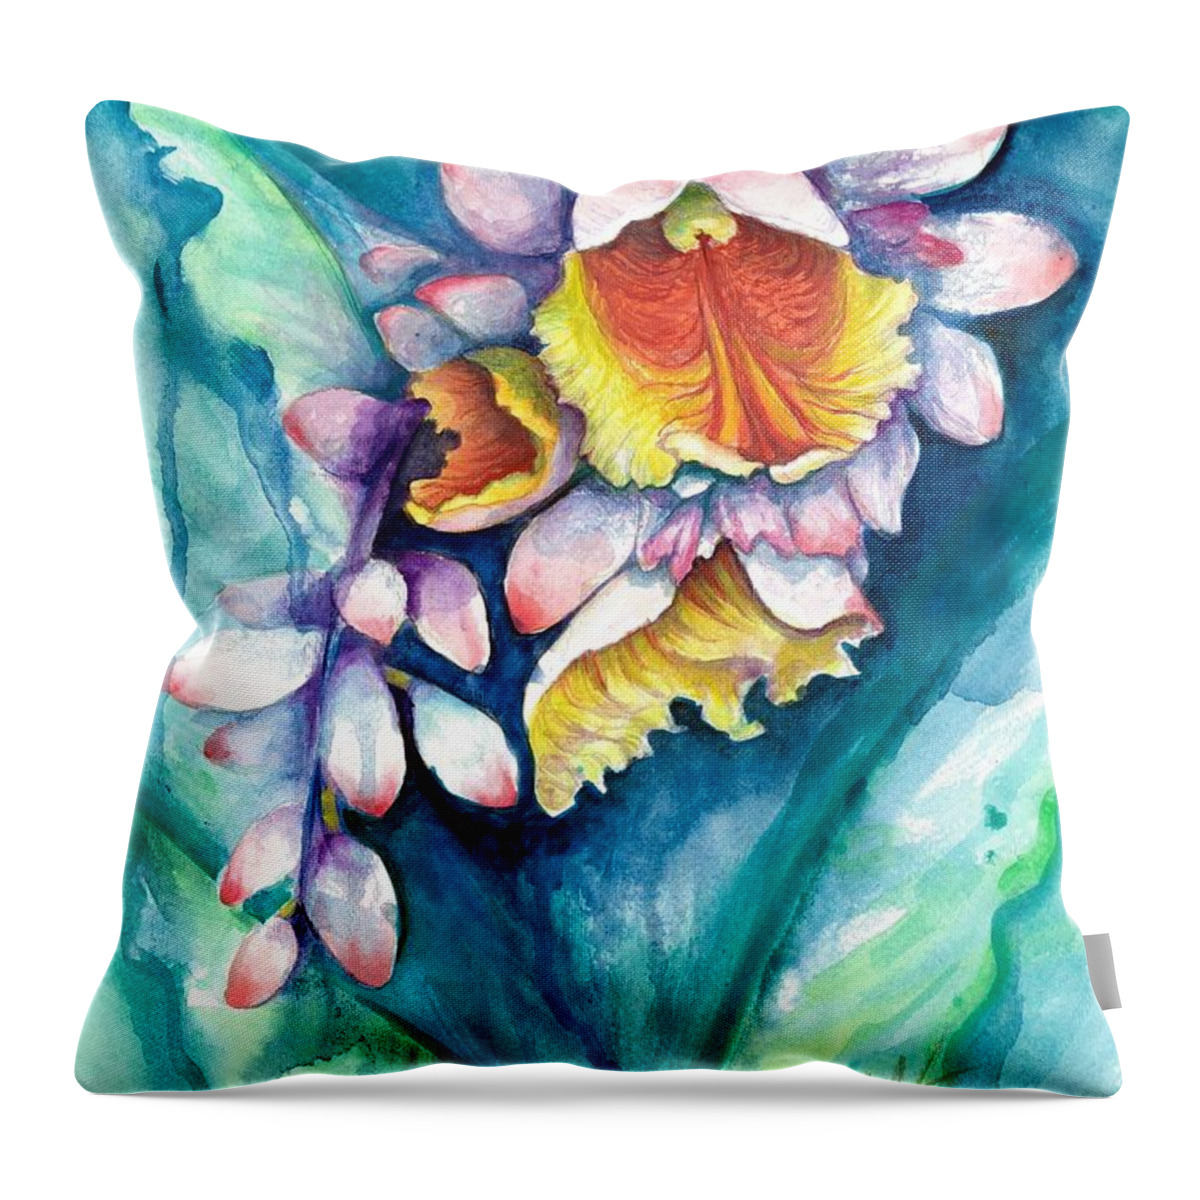  Key West Throw Pillow featuring the painting Key West Ginger by Ashley Kujan